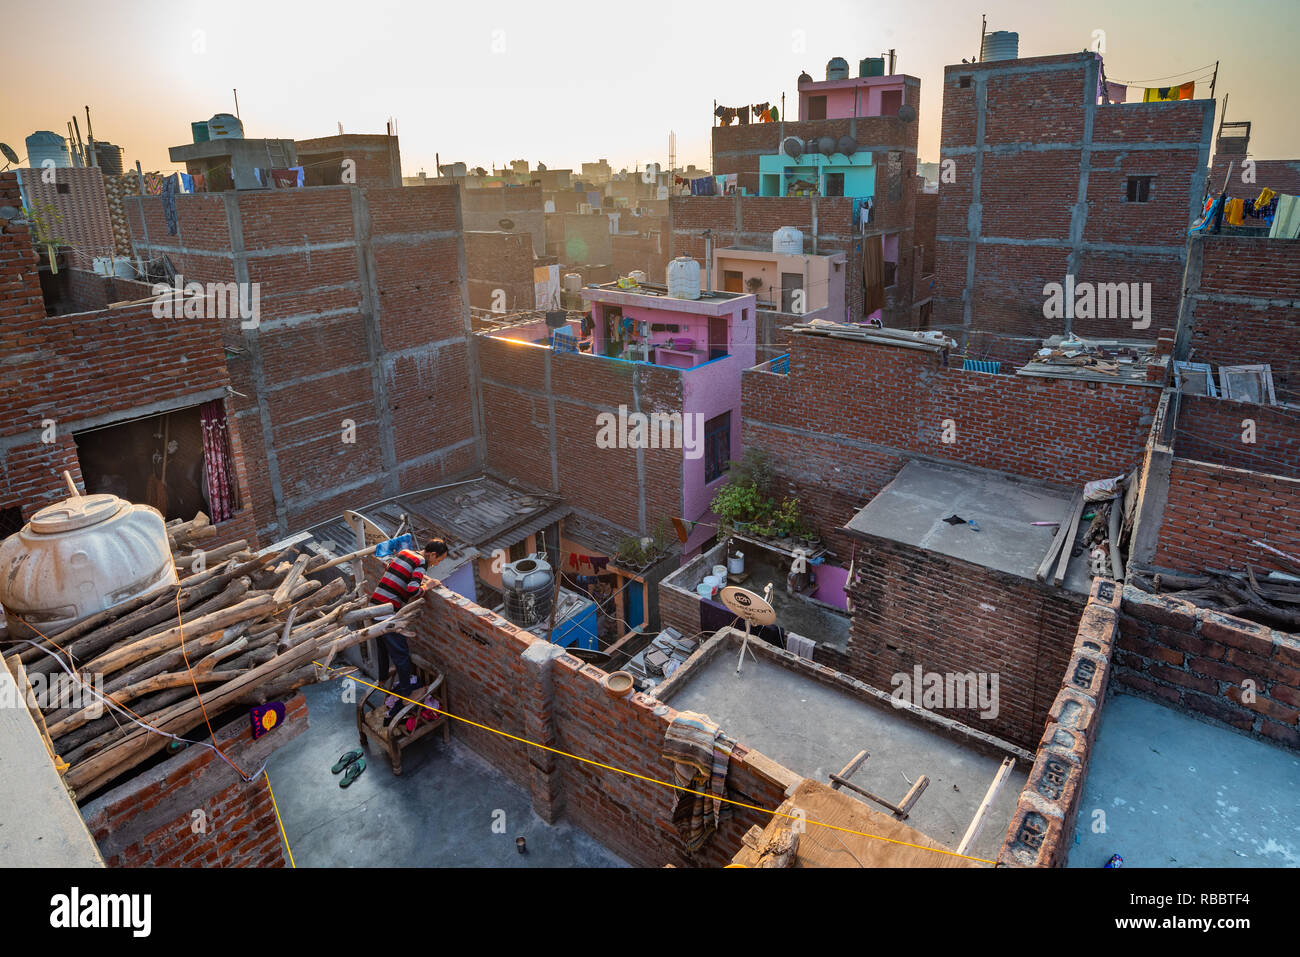 Buildings and roofs in the resettlement New Delhi locality of JJ Colony Madanpur Khadar provide an interesting urban landscape in the morning light Stock Photo